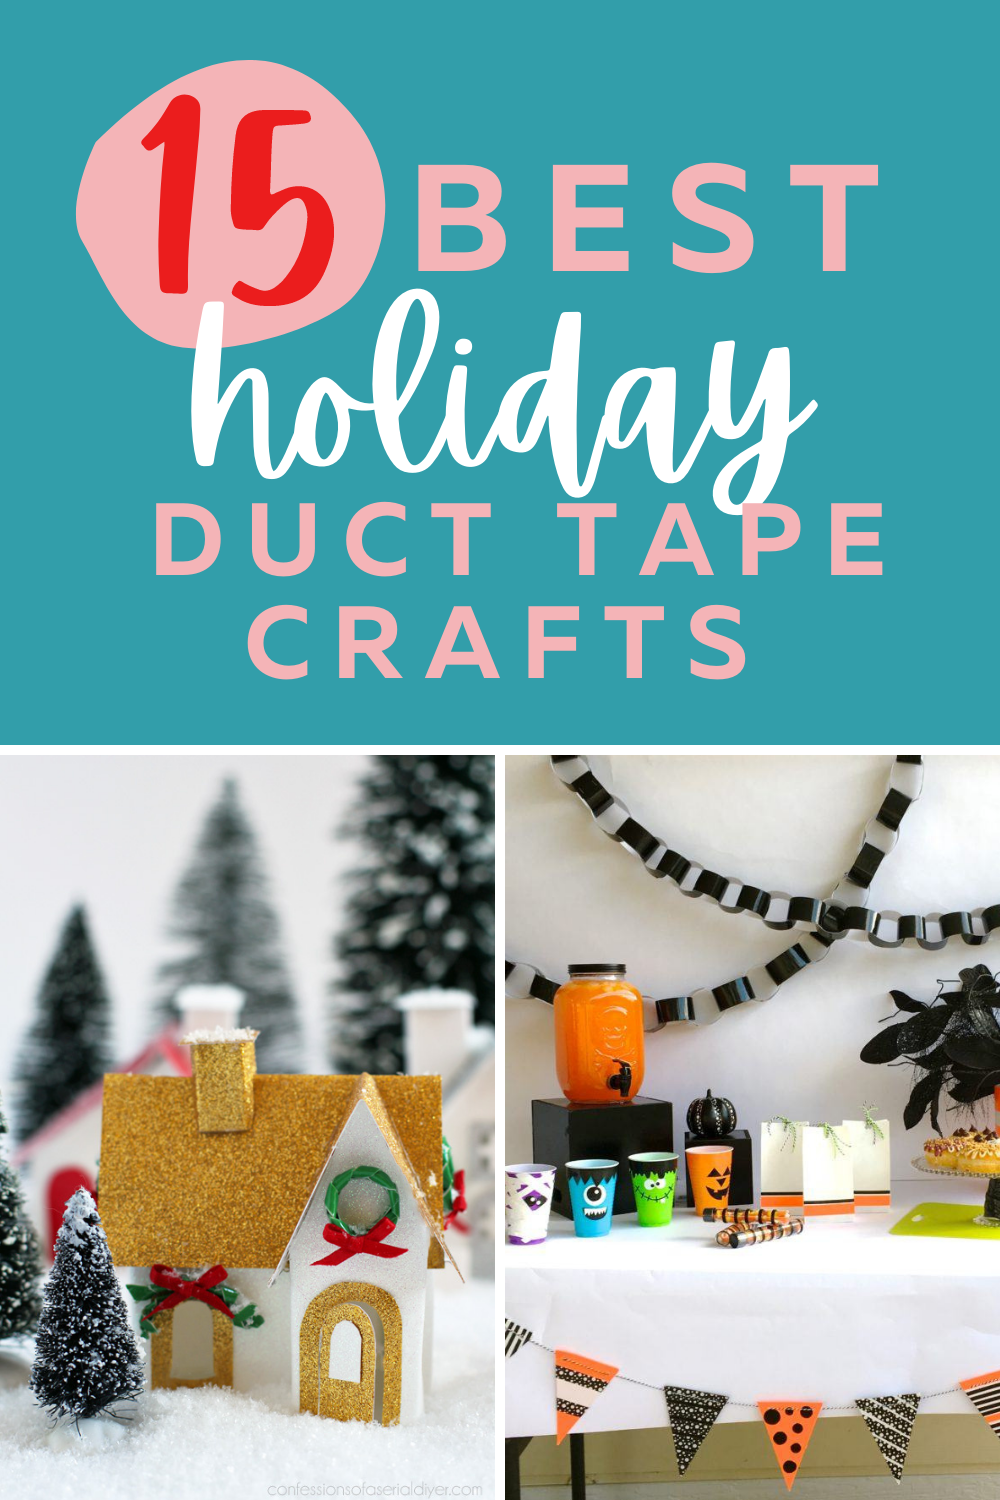 15 best holiday duct tape crafts